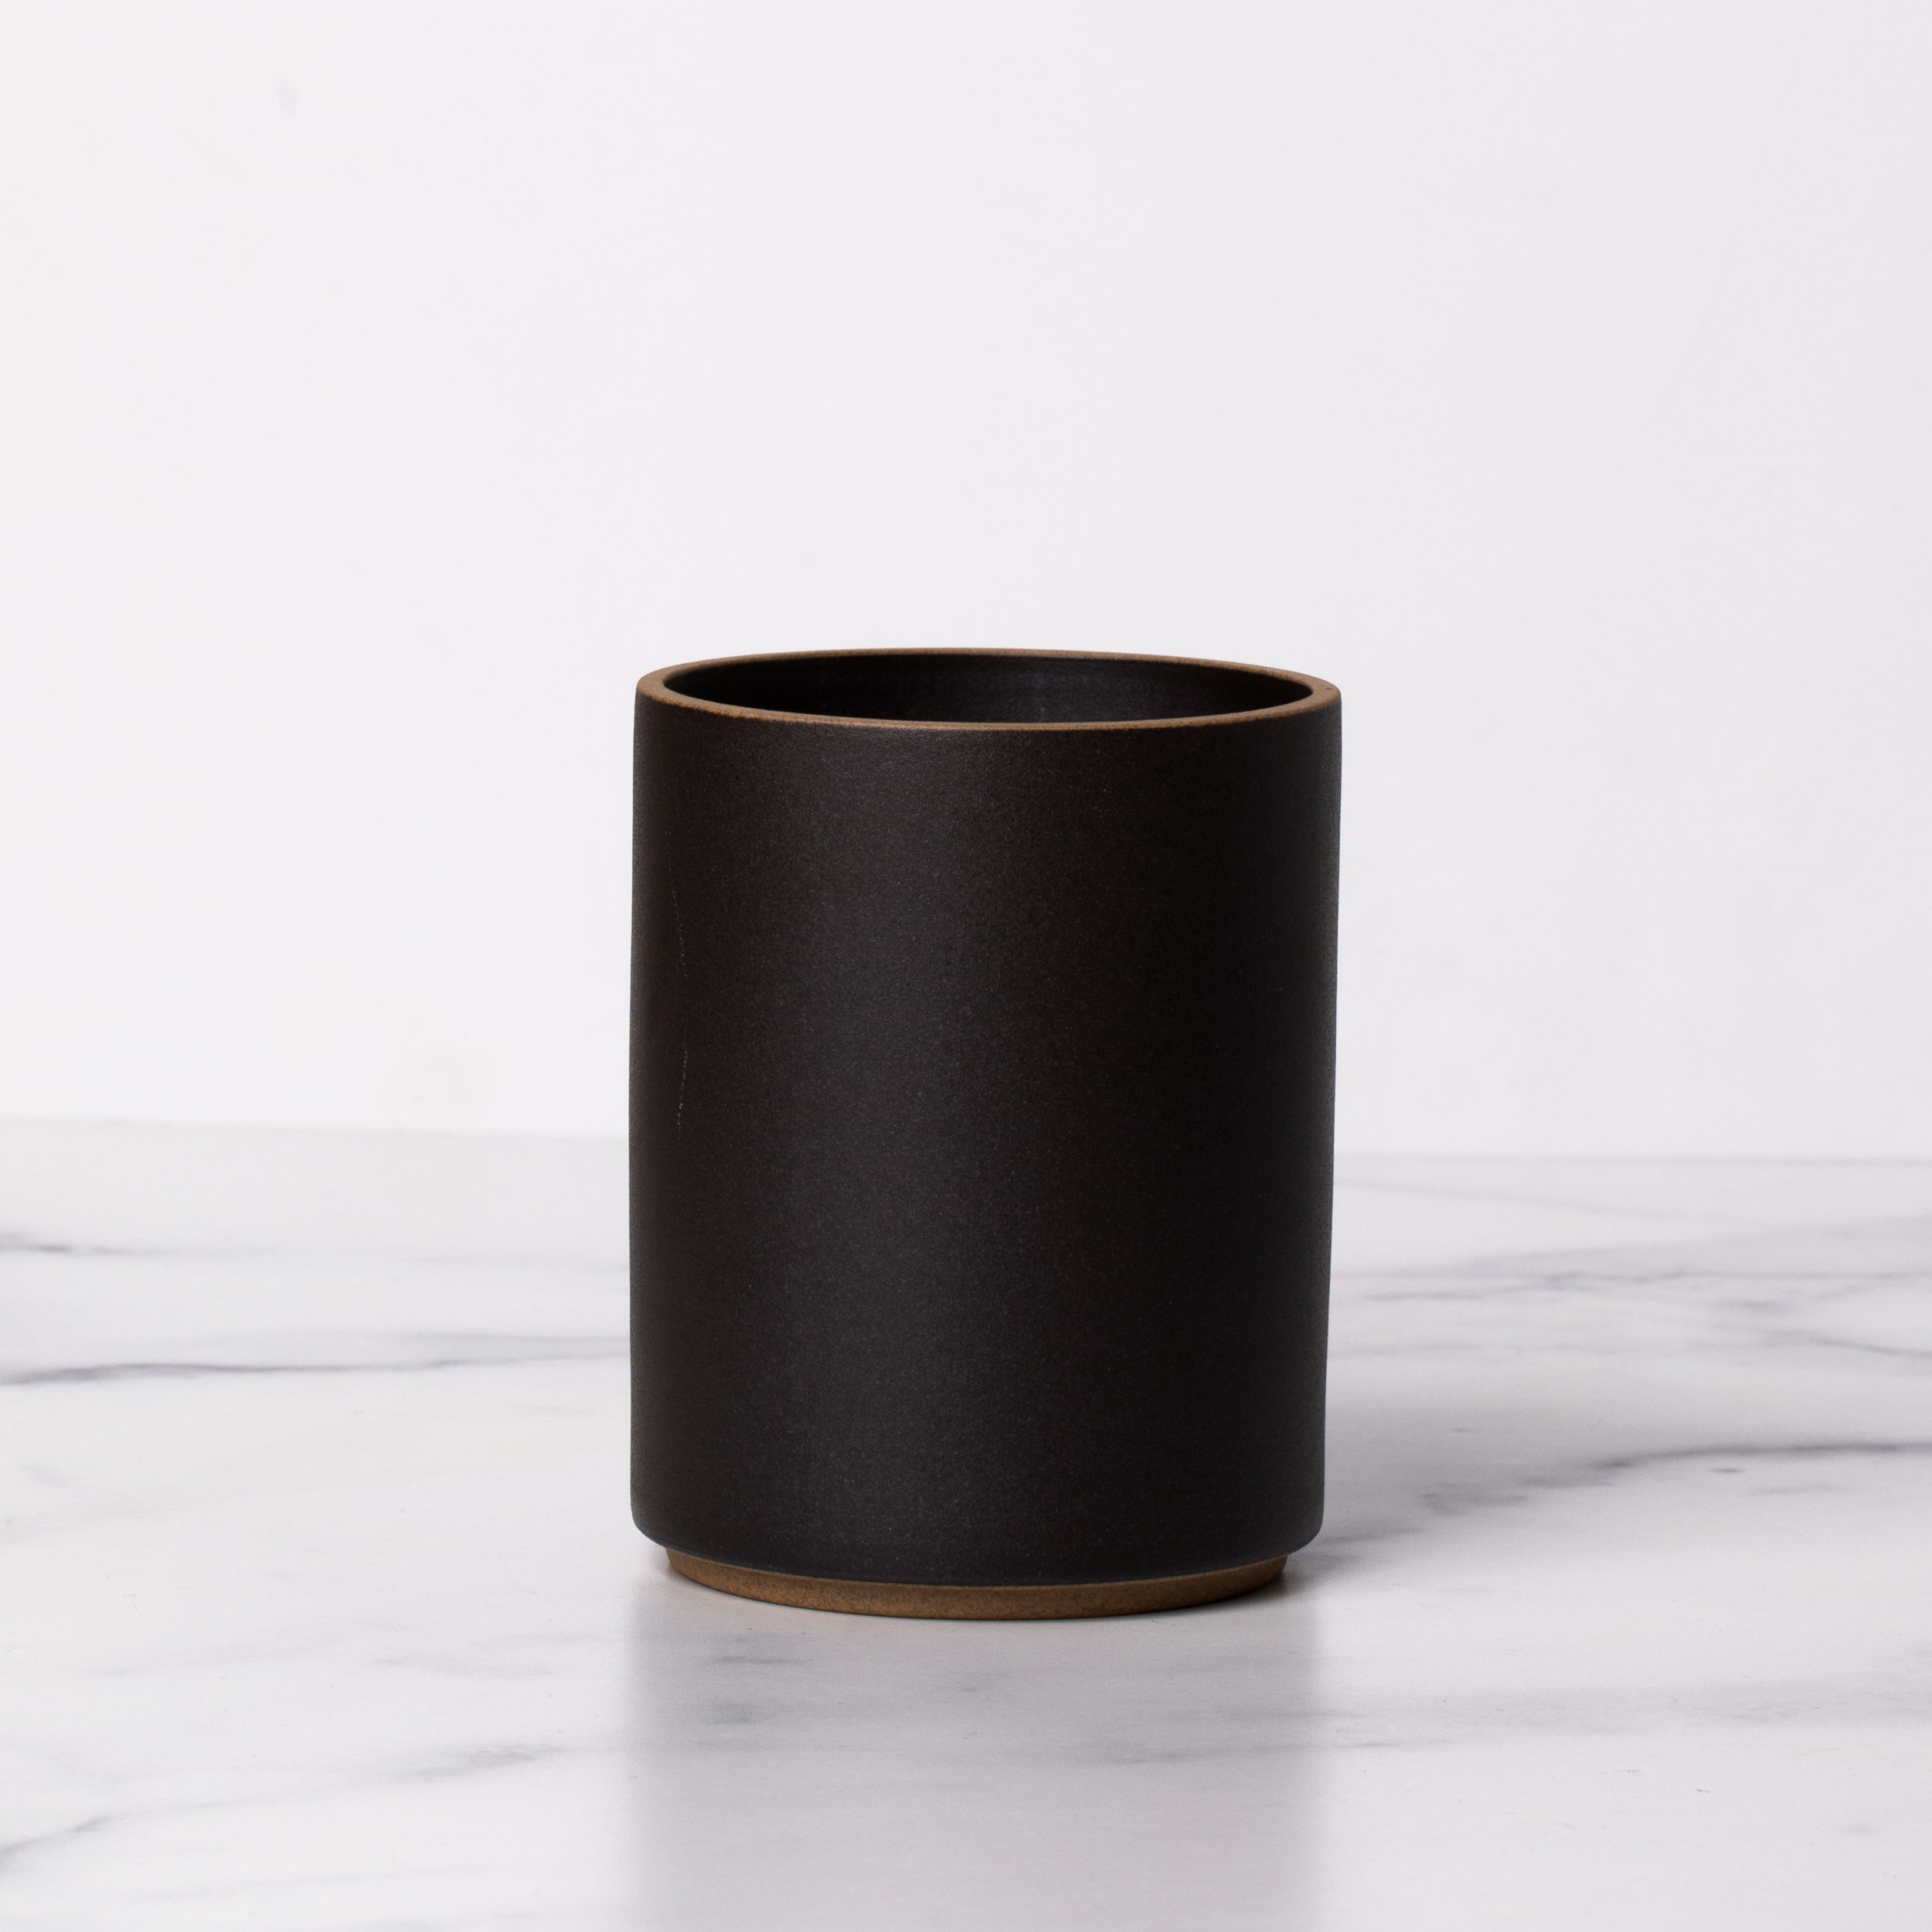 A black porcelain tea tumbler with no handle on a marble background.